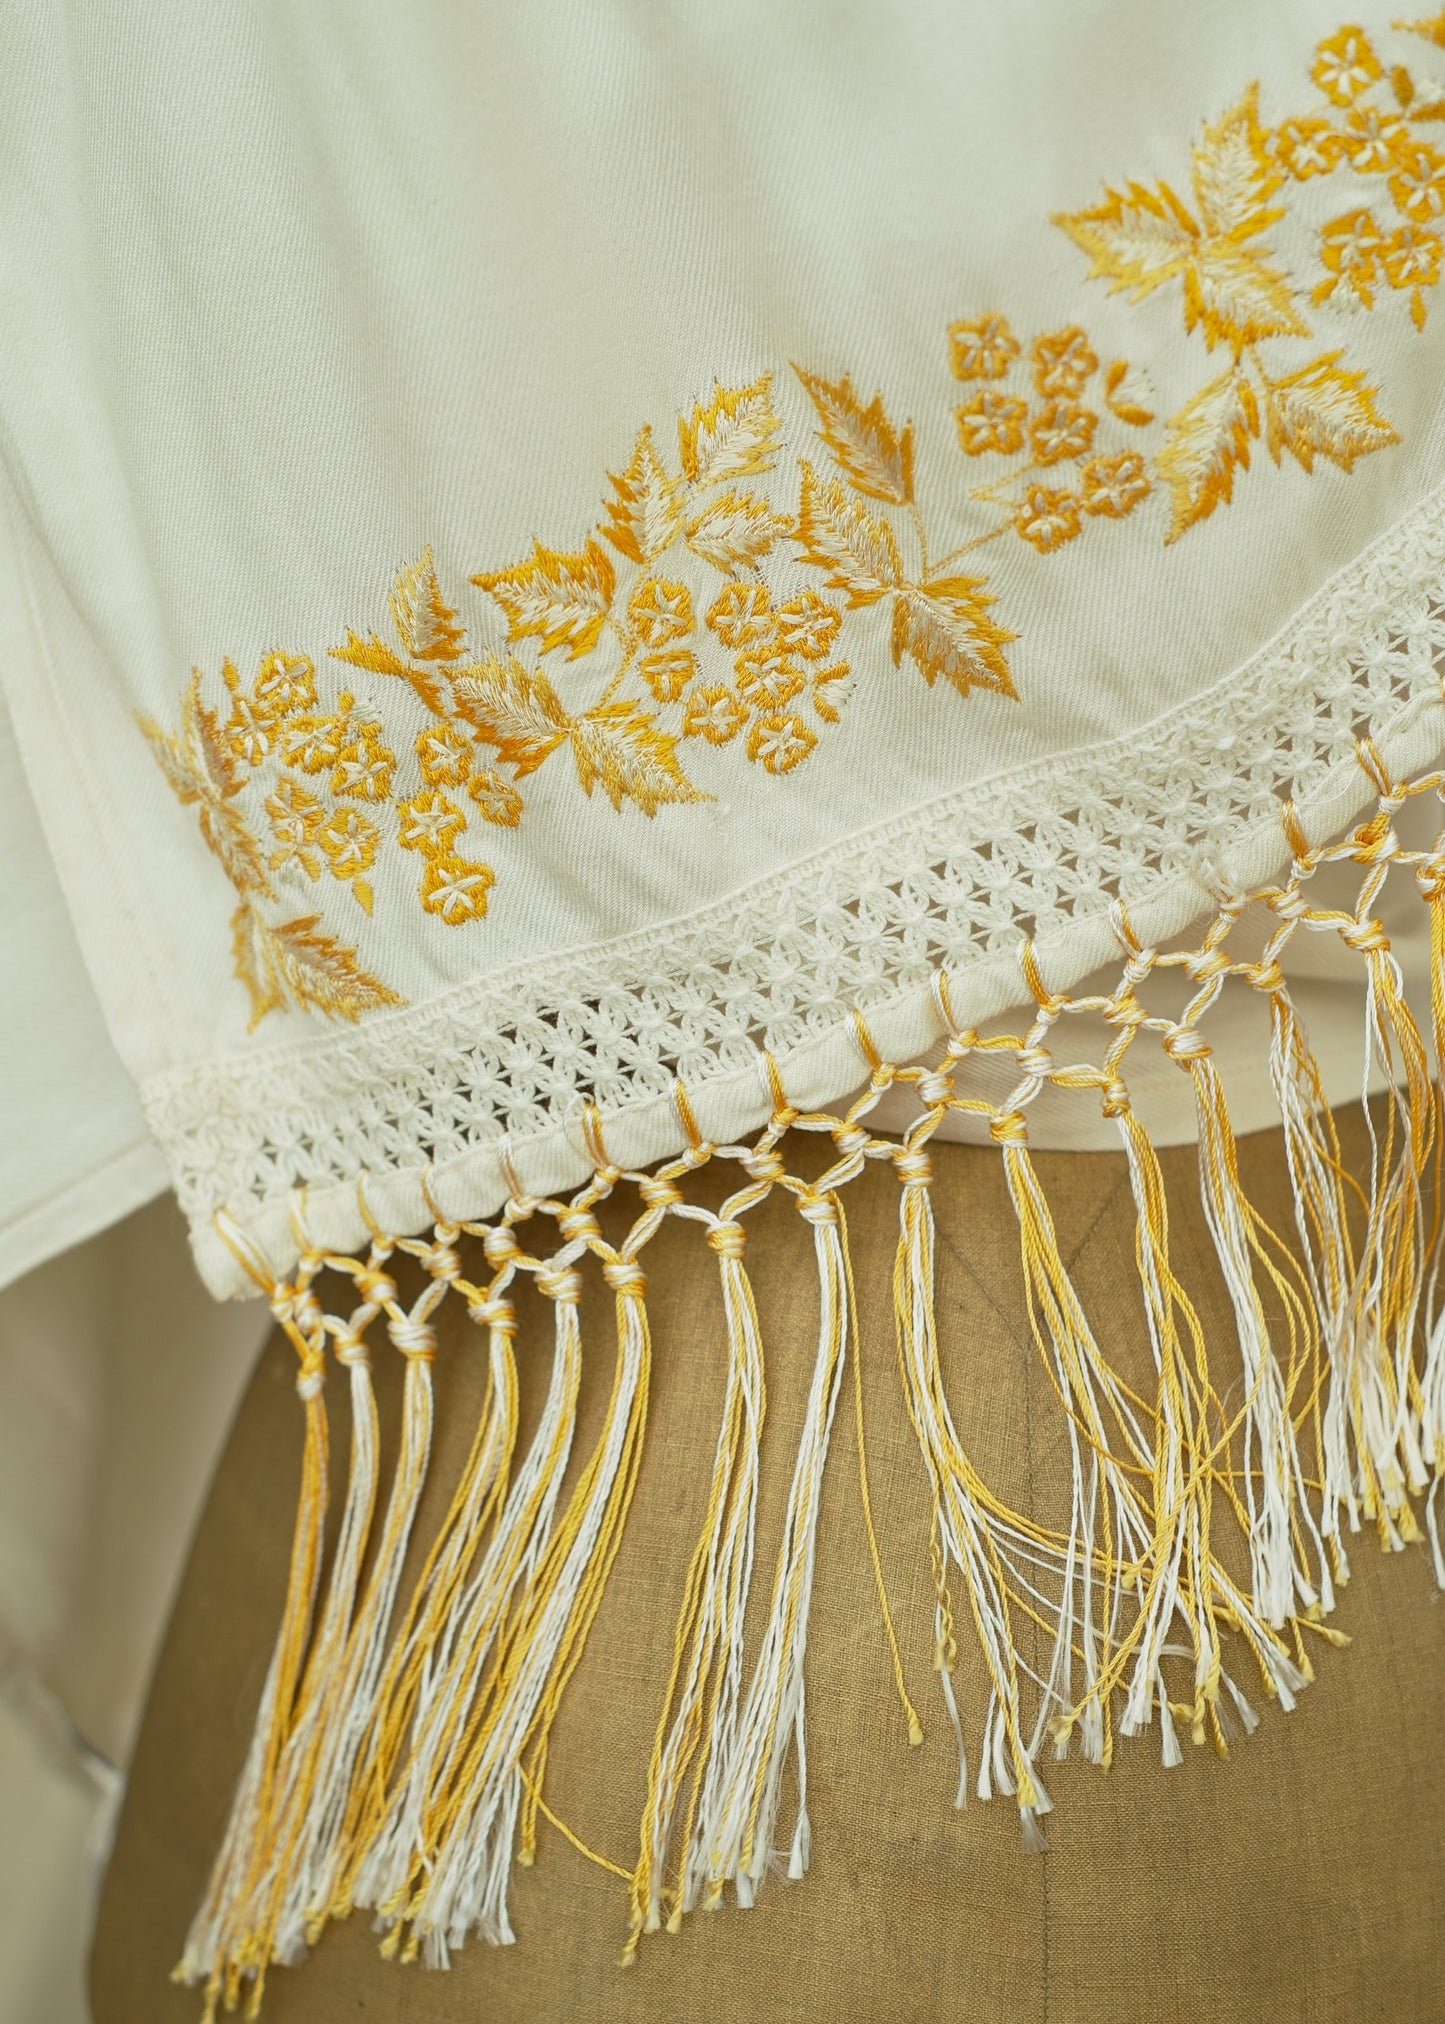 Long Cream Embroidered Leaves Shawl Scarf •  Knotted Fringe